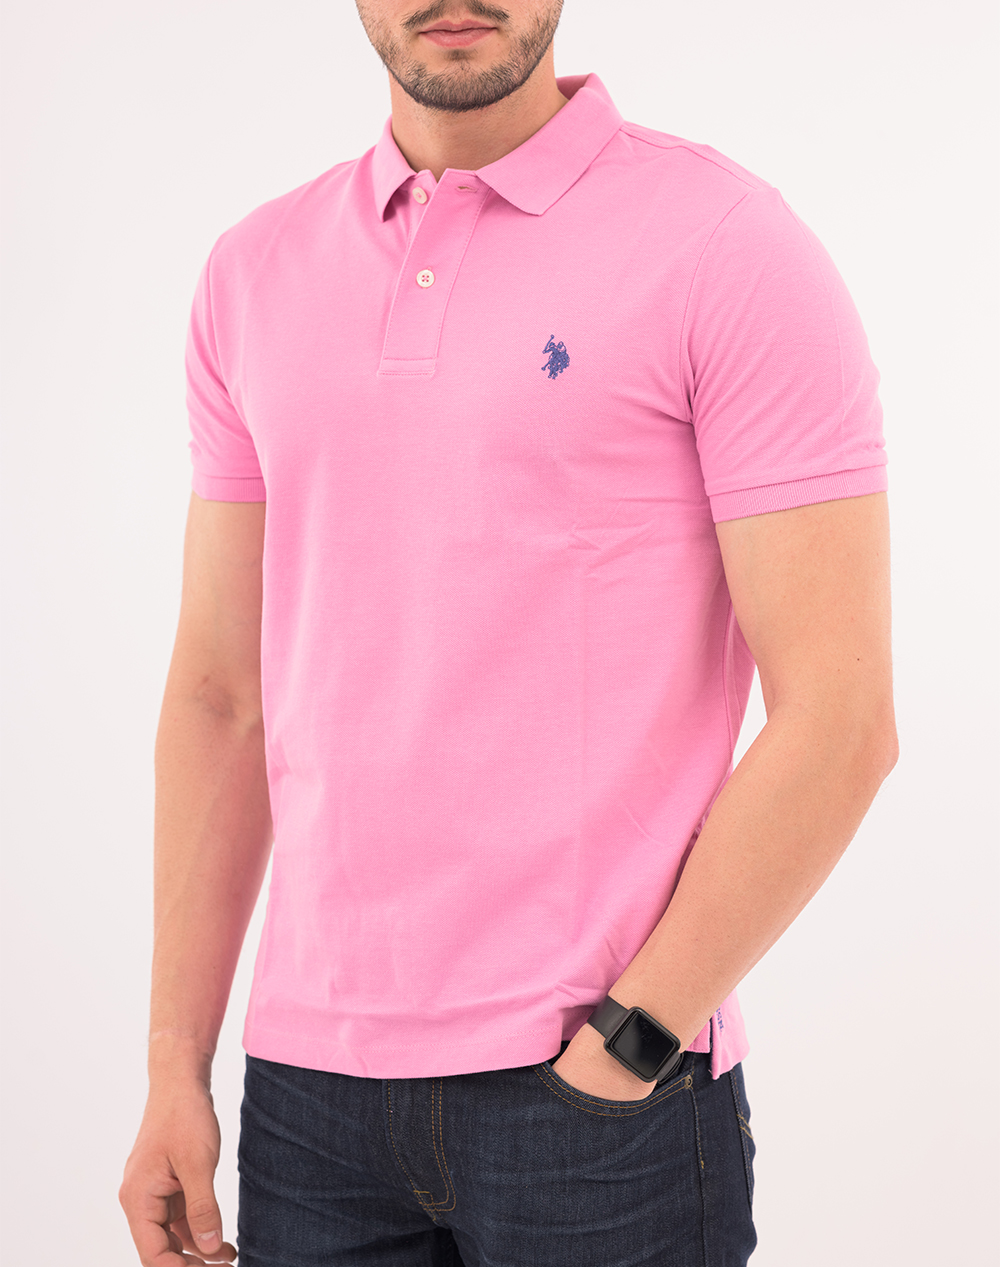 US POLO ASSN KING 41029 EHPD POLO PACK OF 400 ΜΠΛΟΥΖΑ ΑΝΔΡΙΚΟ 6735541029P400-305 Pink